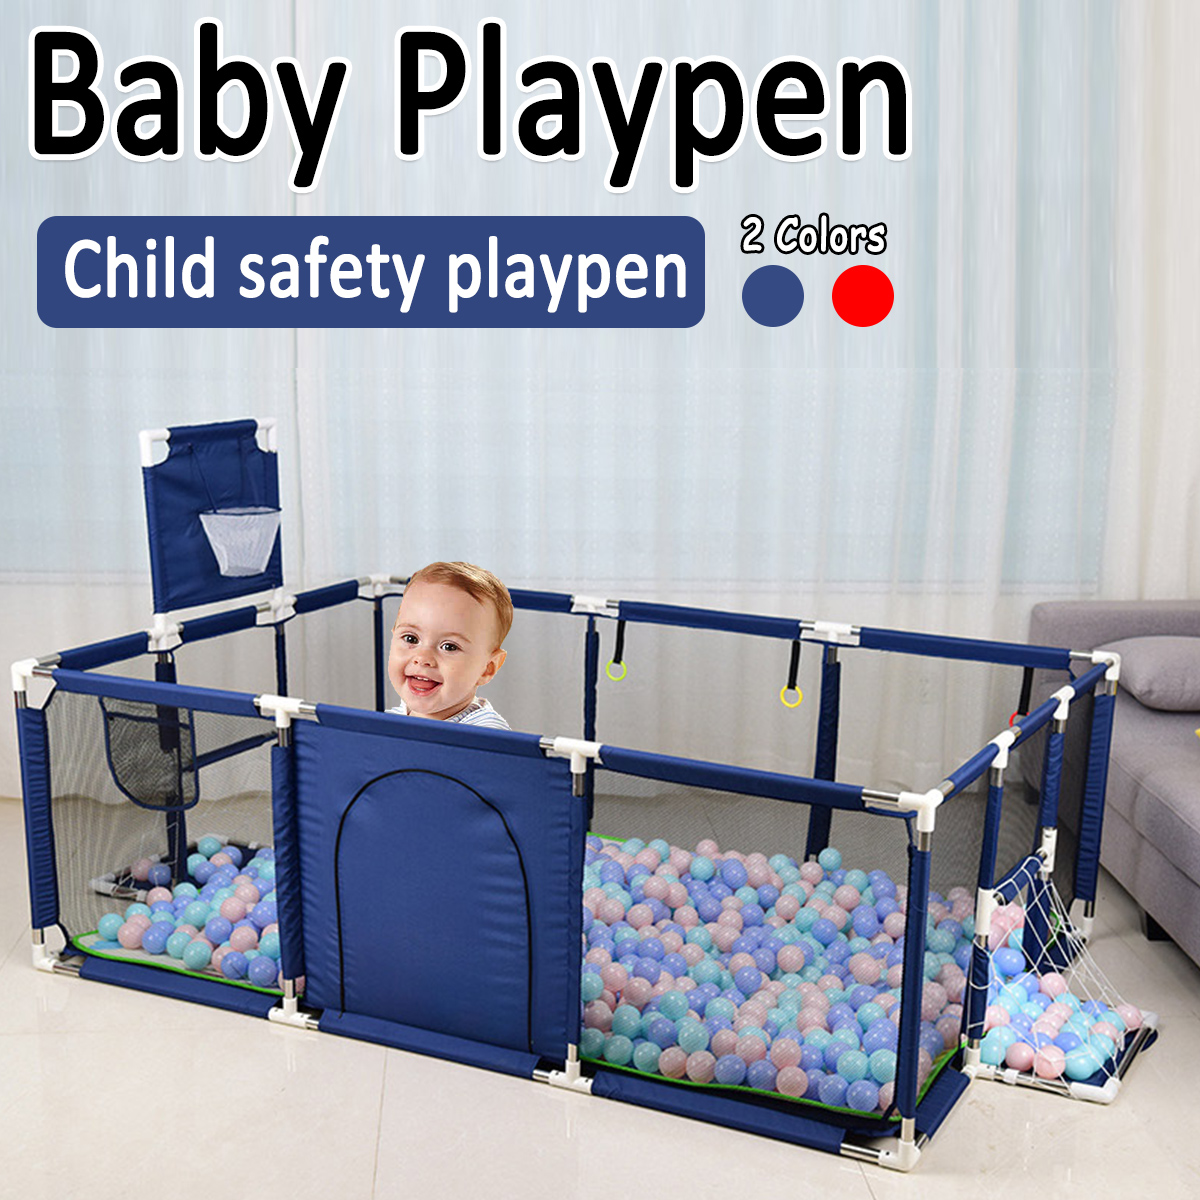 3-in-1-Baby-Playpen-Interactive-Safety-Indoor-Gate-Play-Yards-Tent-Basketball-Court-Kids-Furniture-f-1693785-2